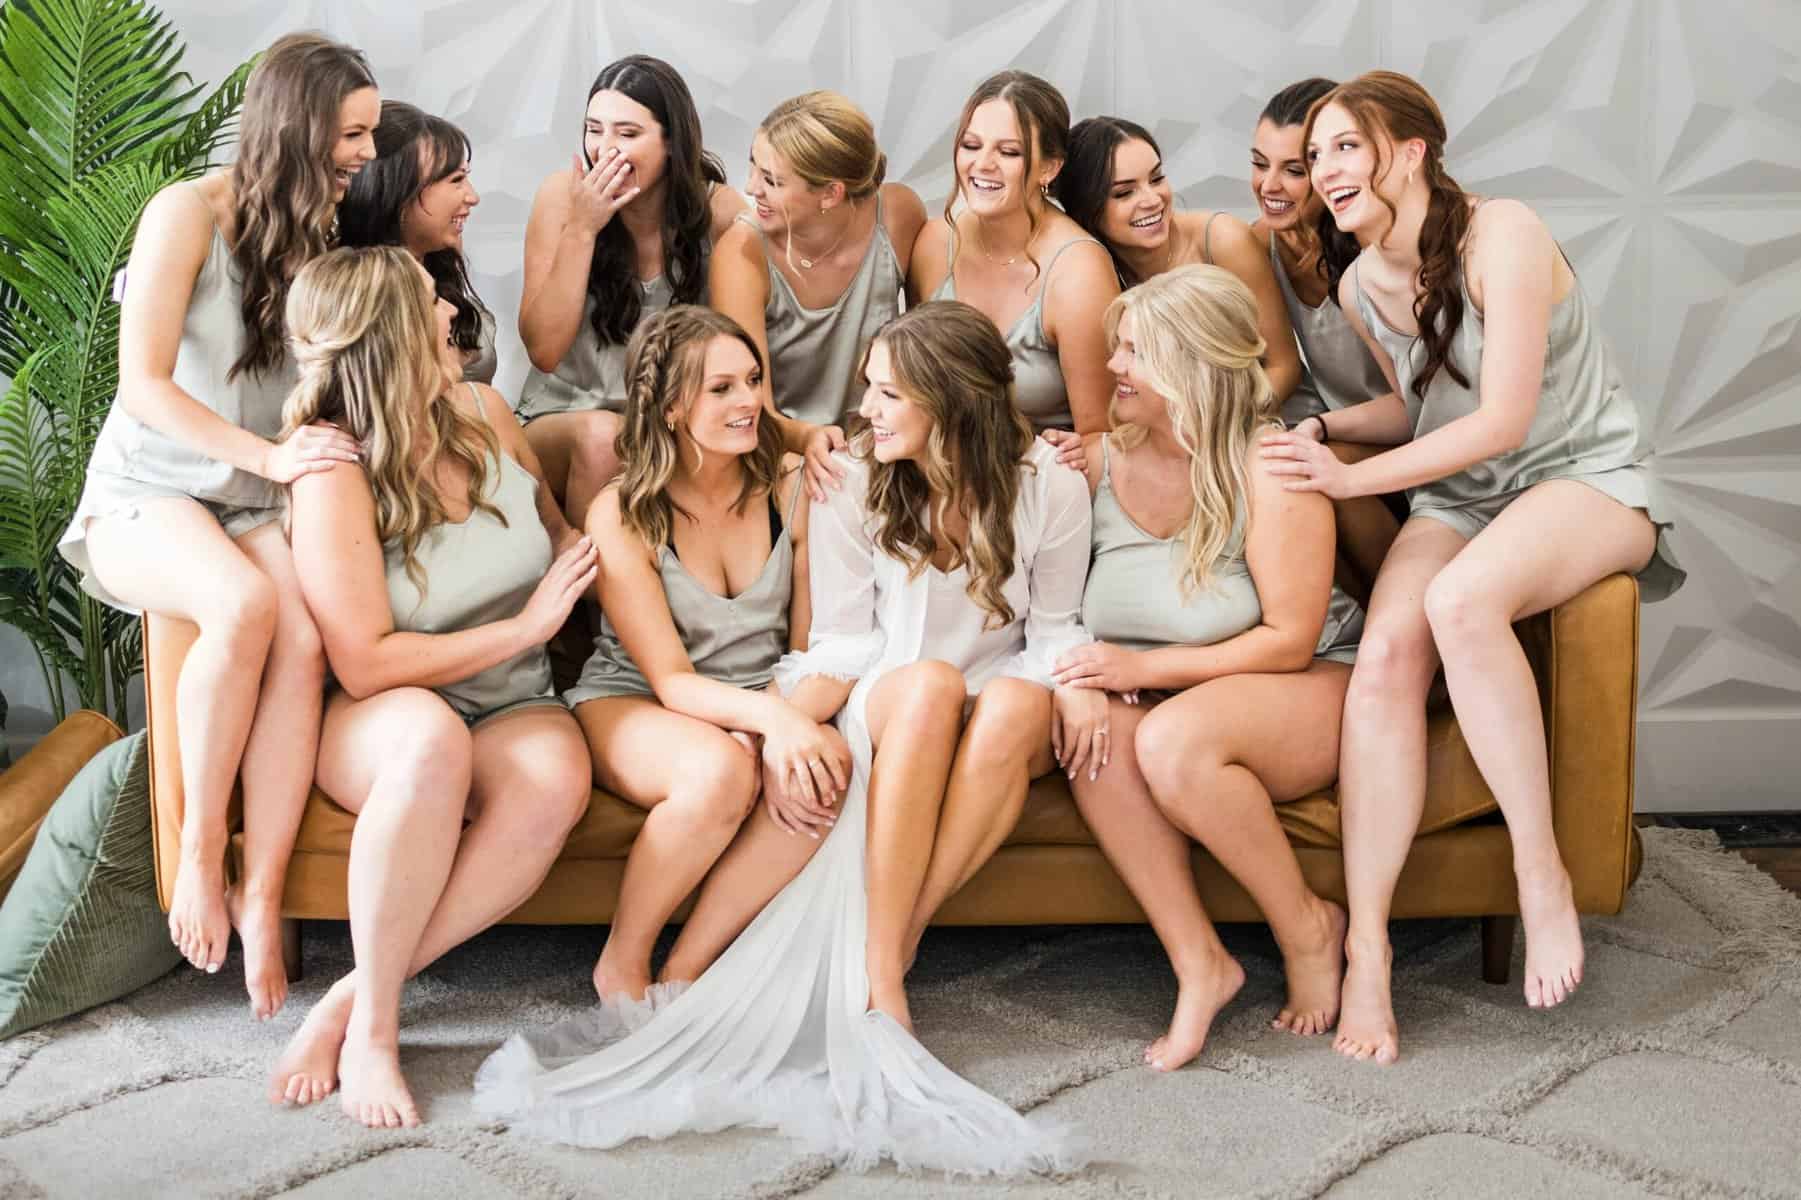 A group of bridesmaids posing on a couch.